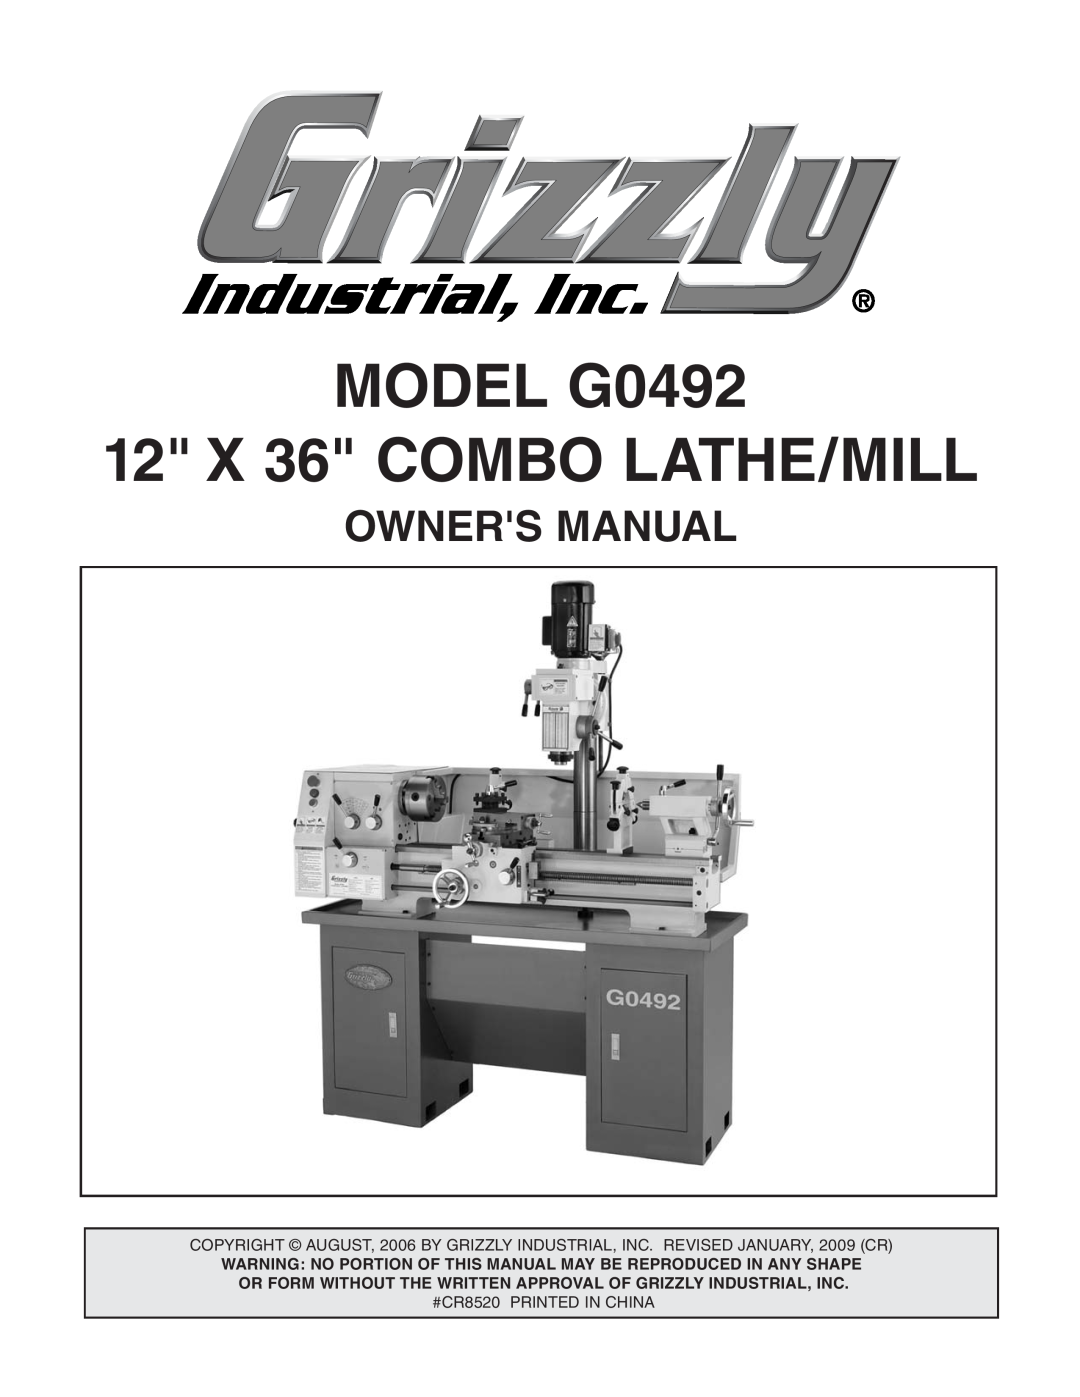 Grizzly manual Owners Manual, MODEL G0492 12 X 36 COMBO LATHE/MILL 